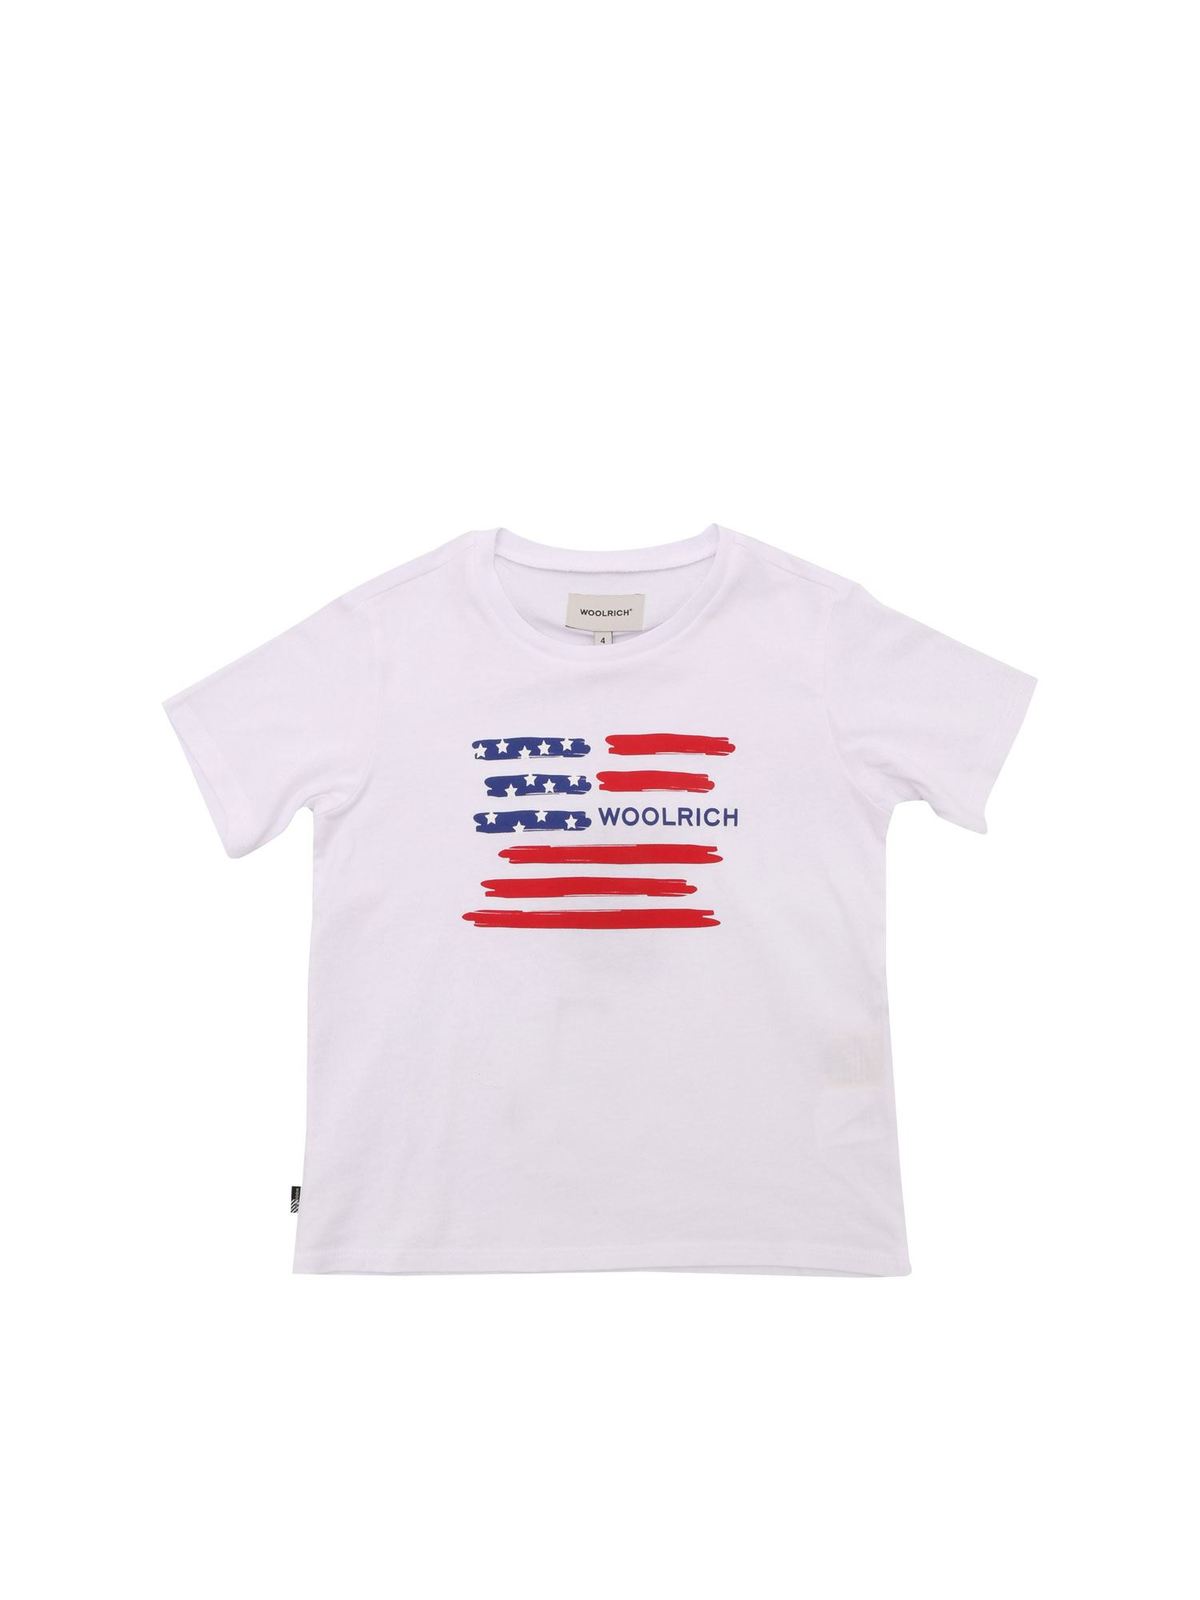 WOOLRICH FLAG T-SHIRT IN WHITE